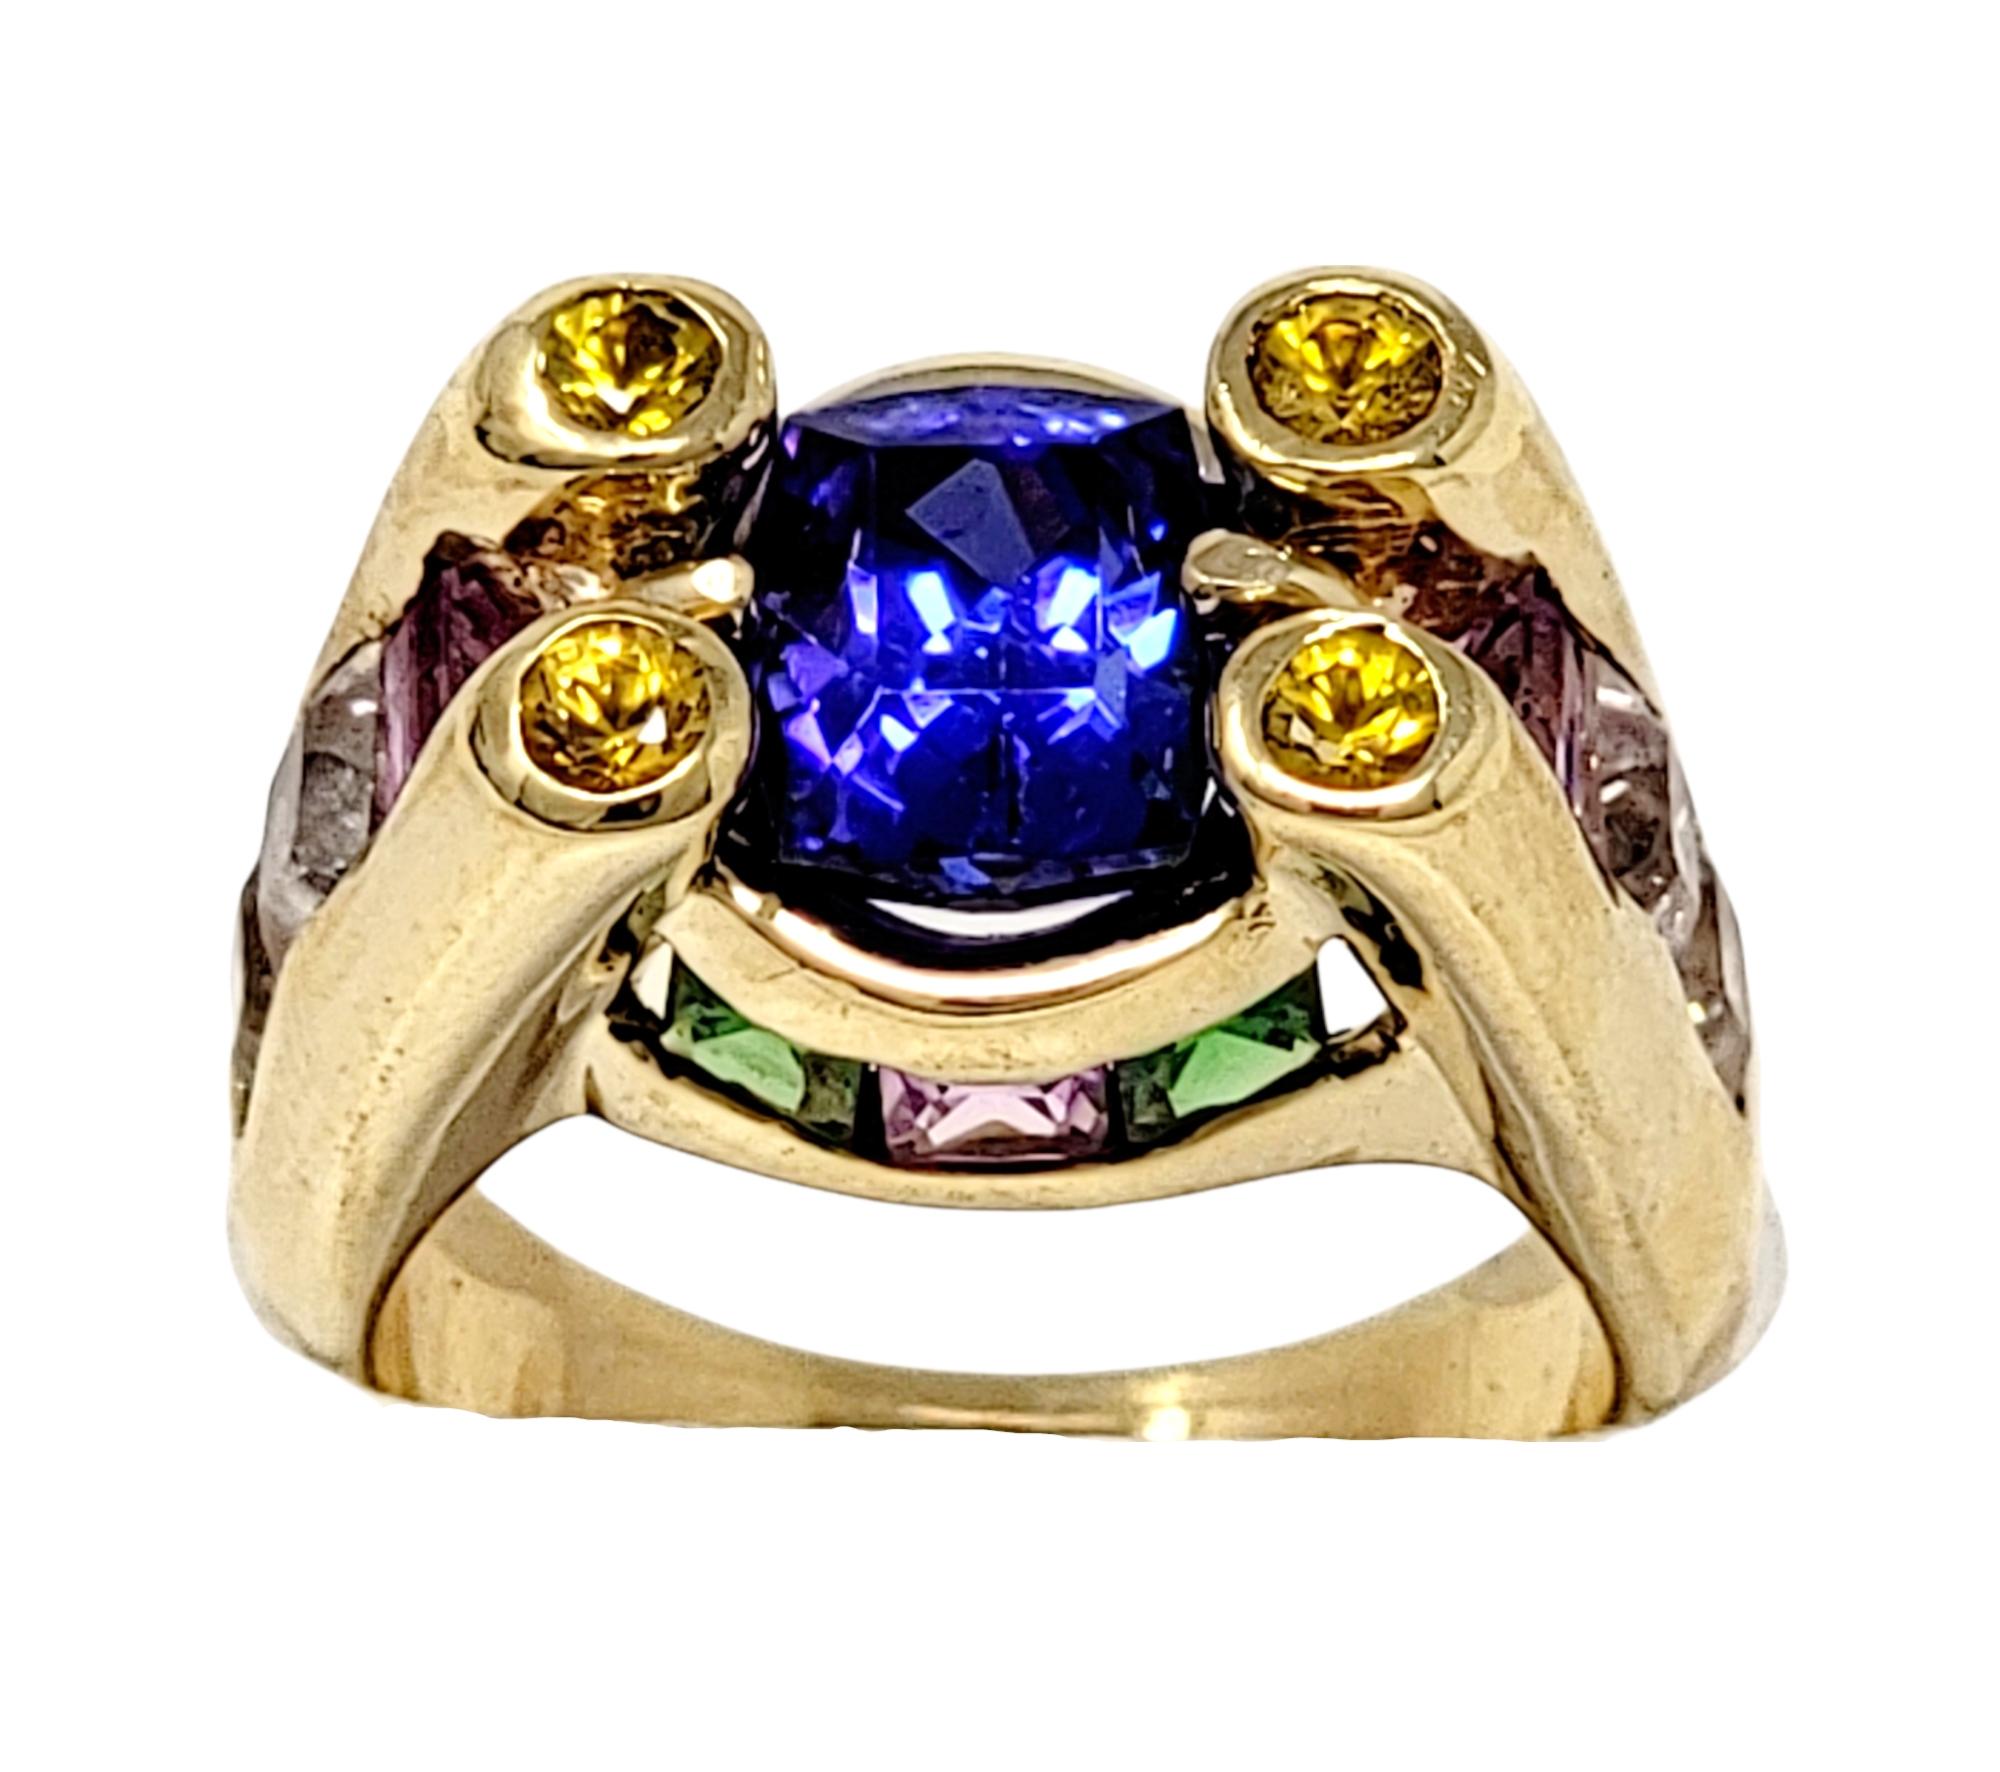 Contemporary Cushion Cut Tanzanite, Tsavorite, Spinel and Sapphire Ring in 18 Karat Gold For Sale